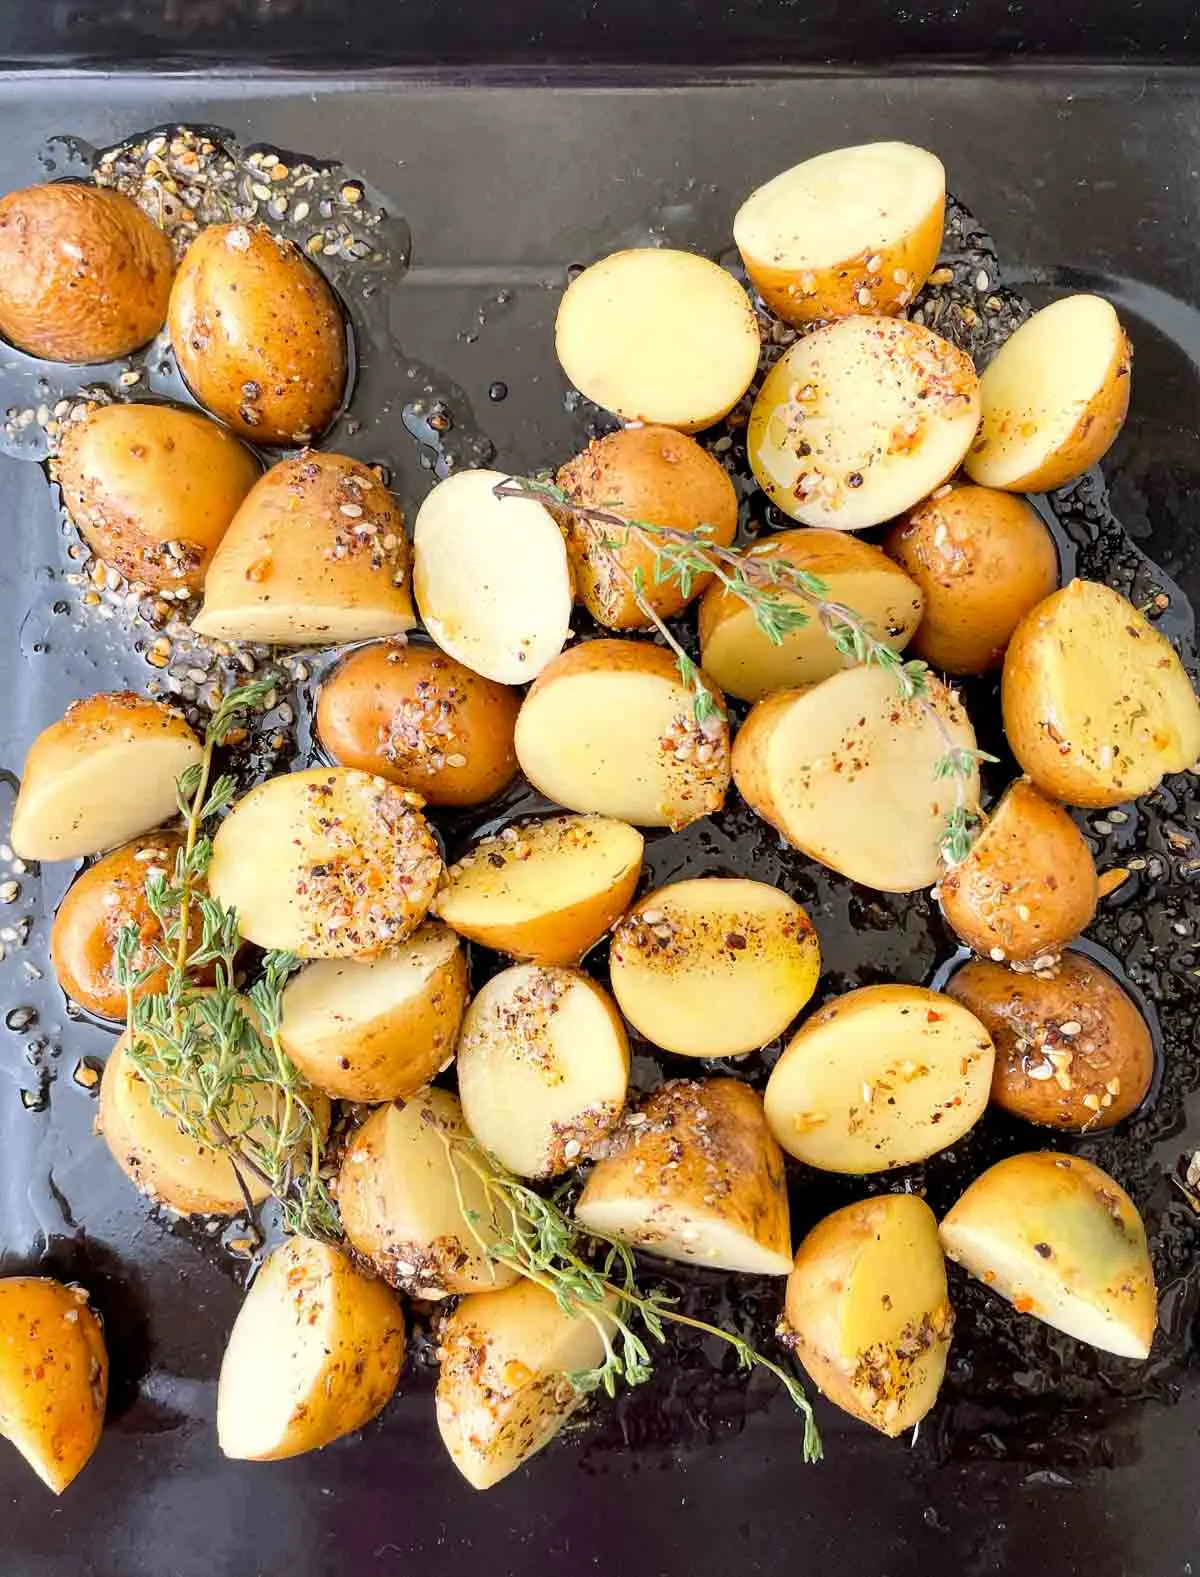 Seasoning young potatoes with zaatar and olive oil on a baking sheet